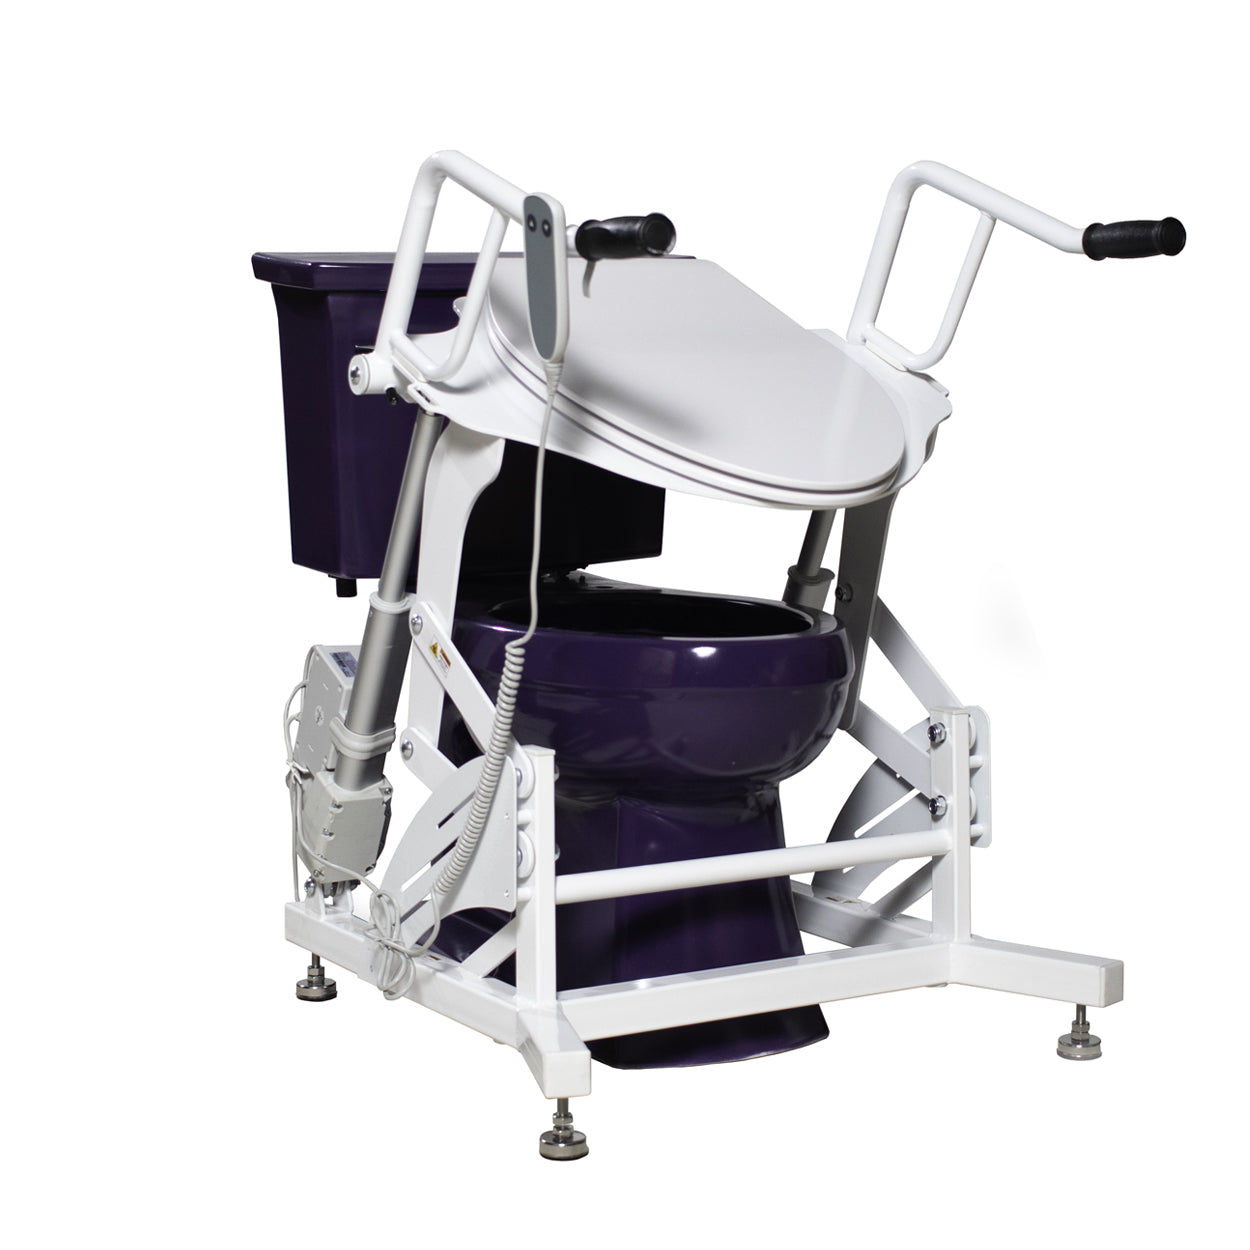 Image of Dignity Lifts - Basic Toilet Lift - BL1 - In Stock, Ships Now